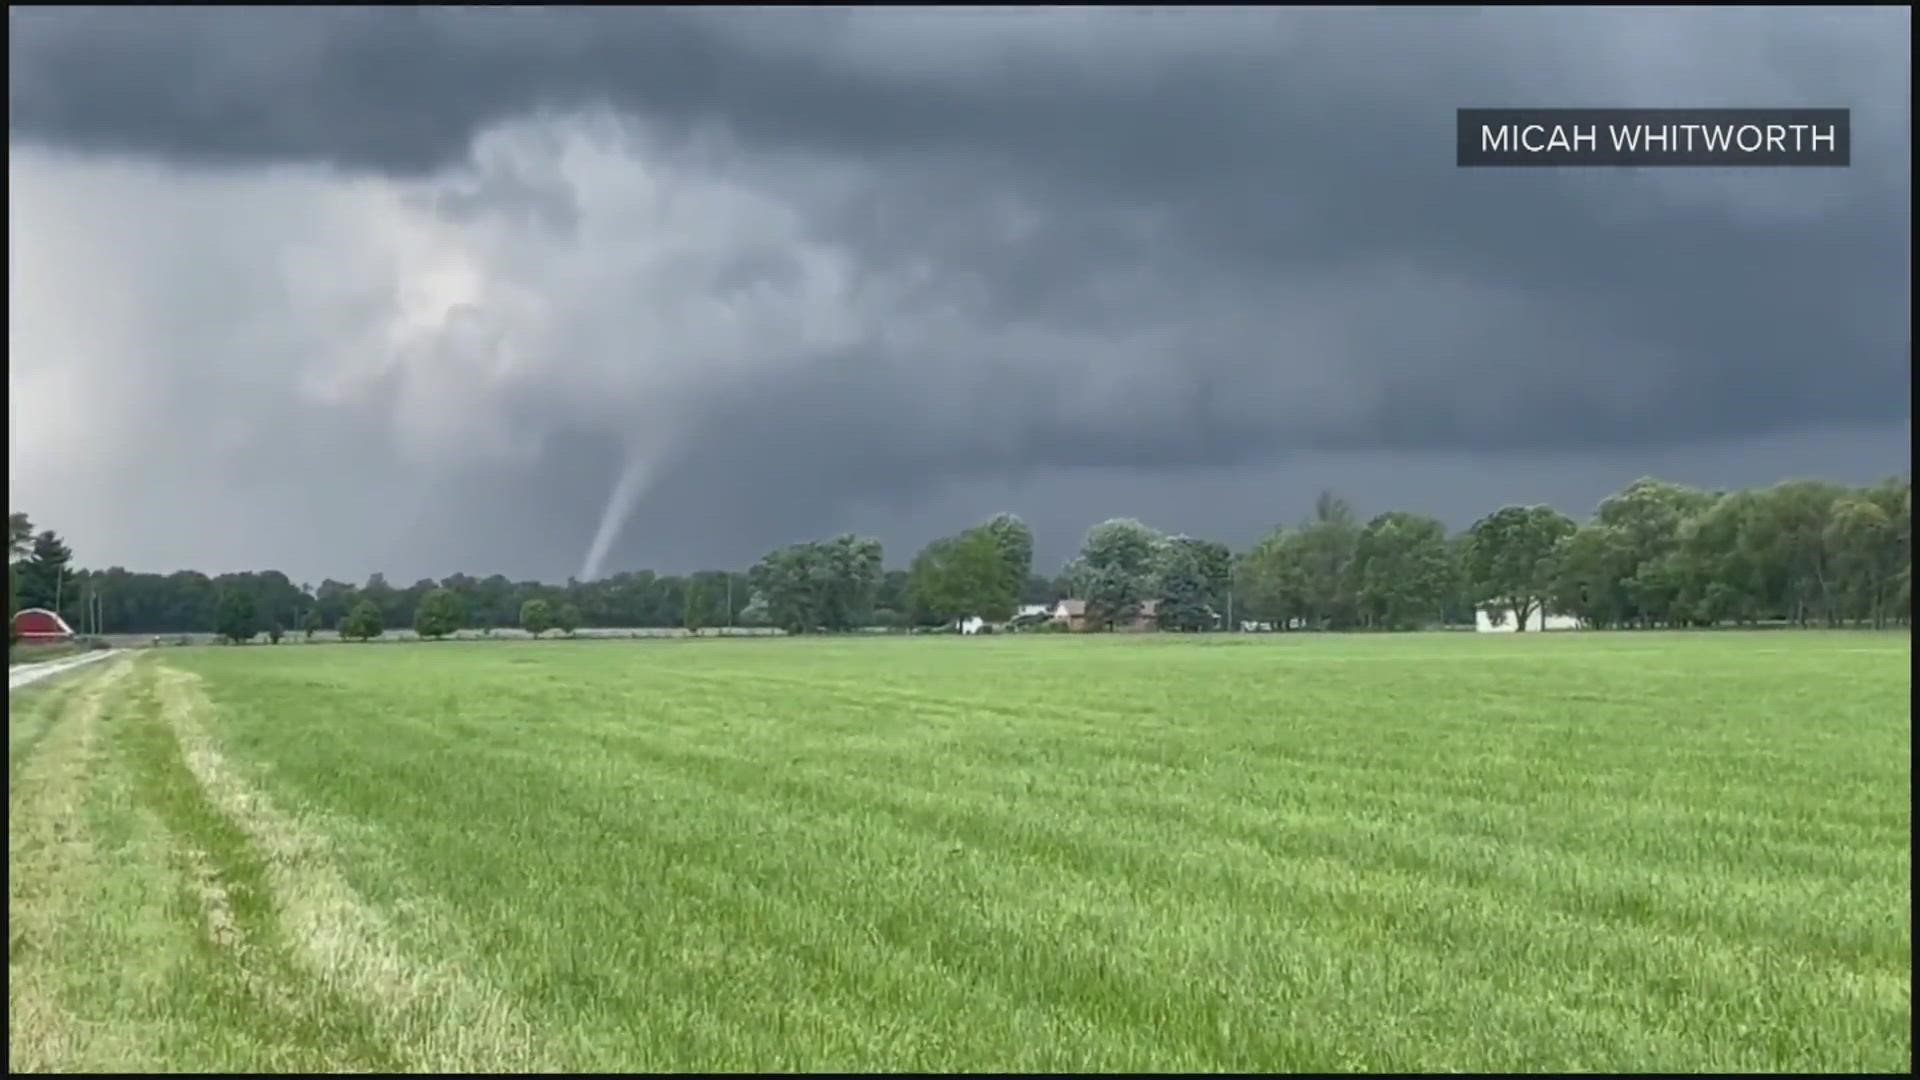 WATCH Tornado touches down in Tipp City, Ohio